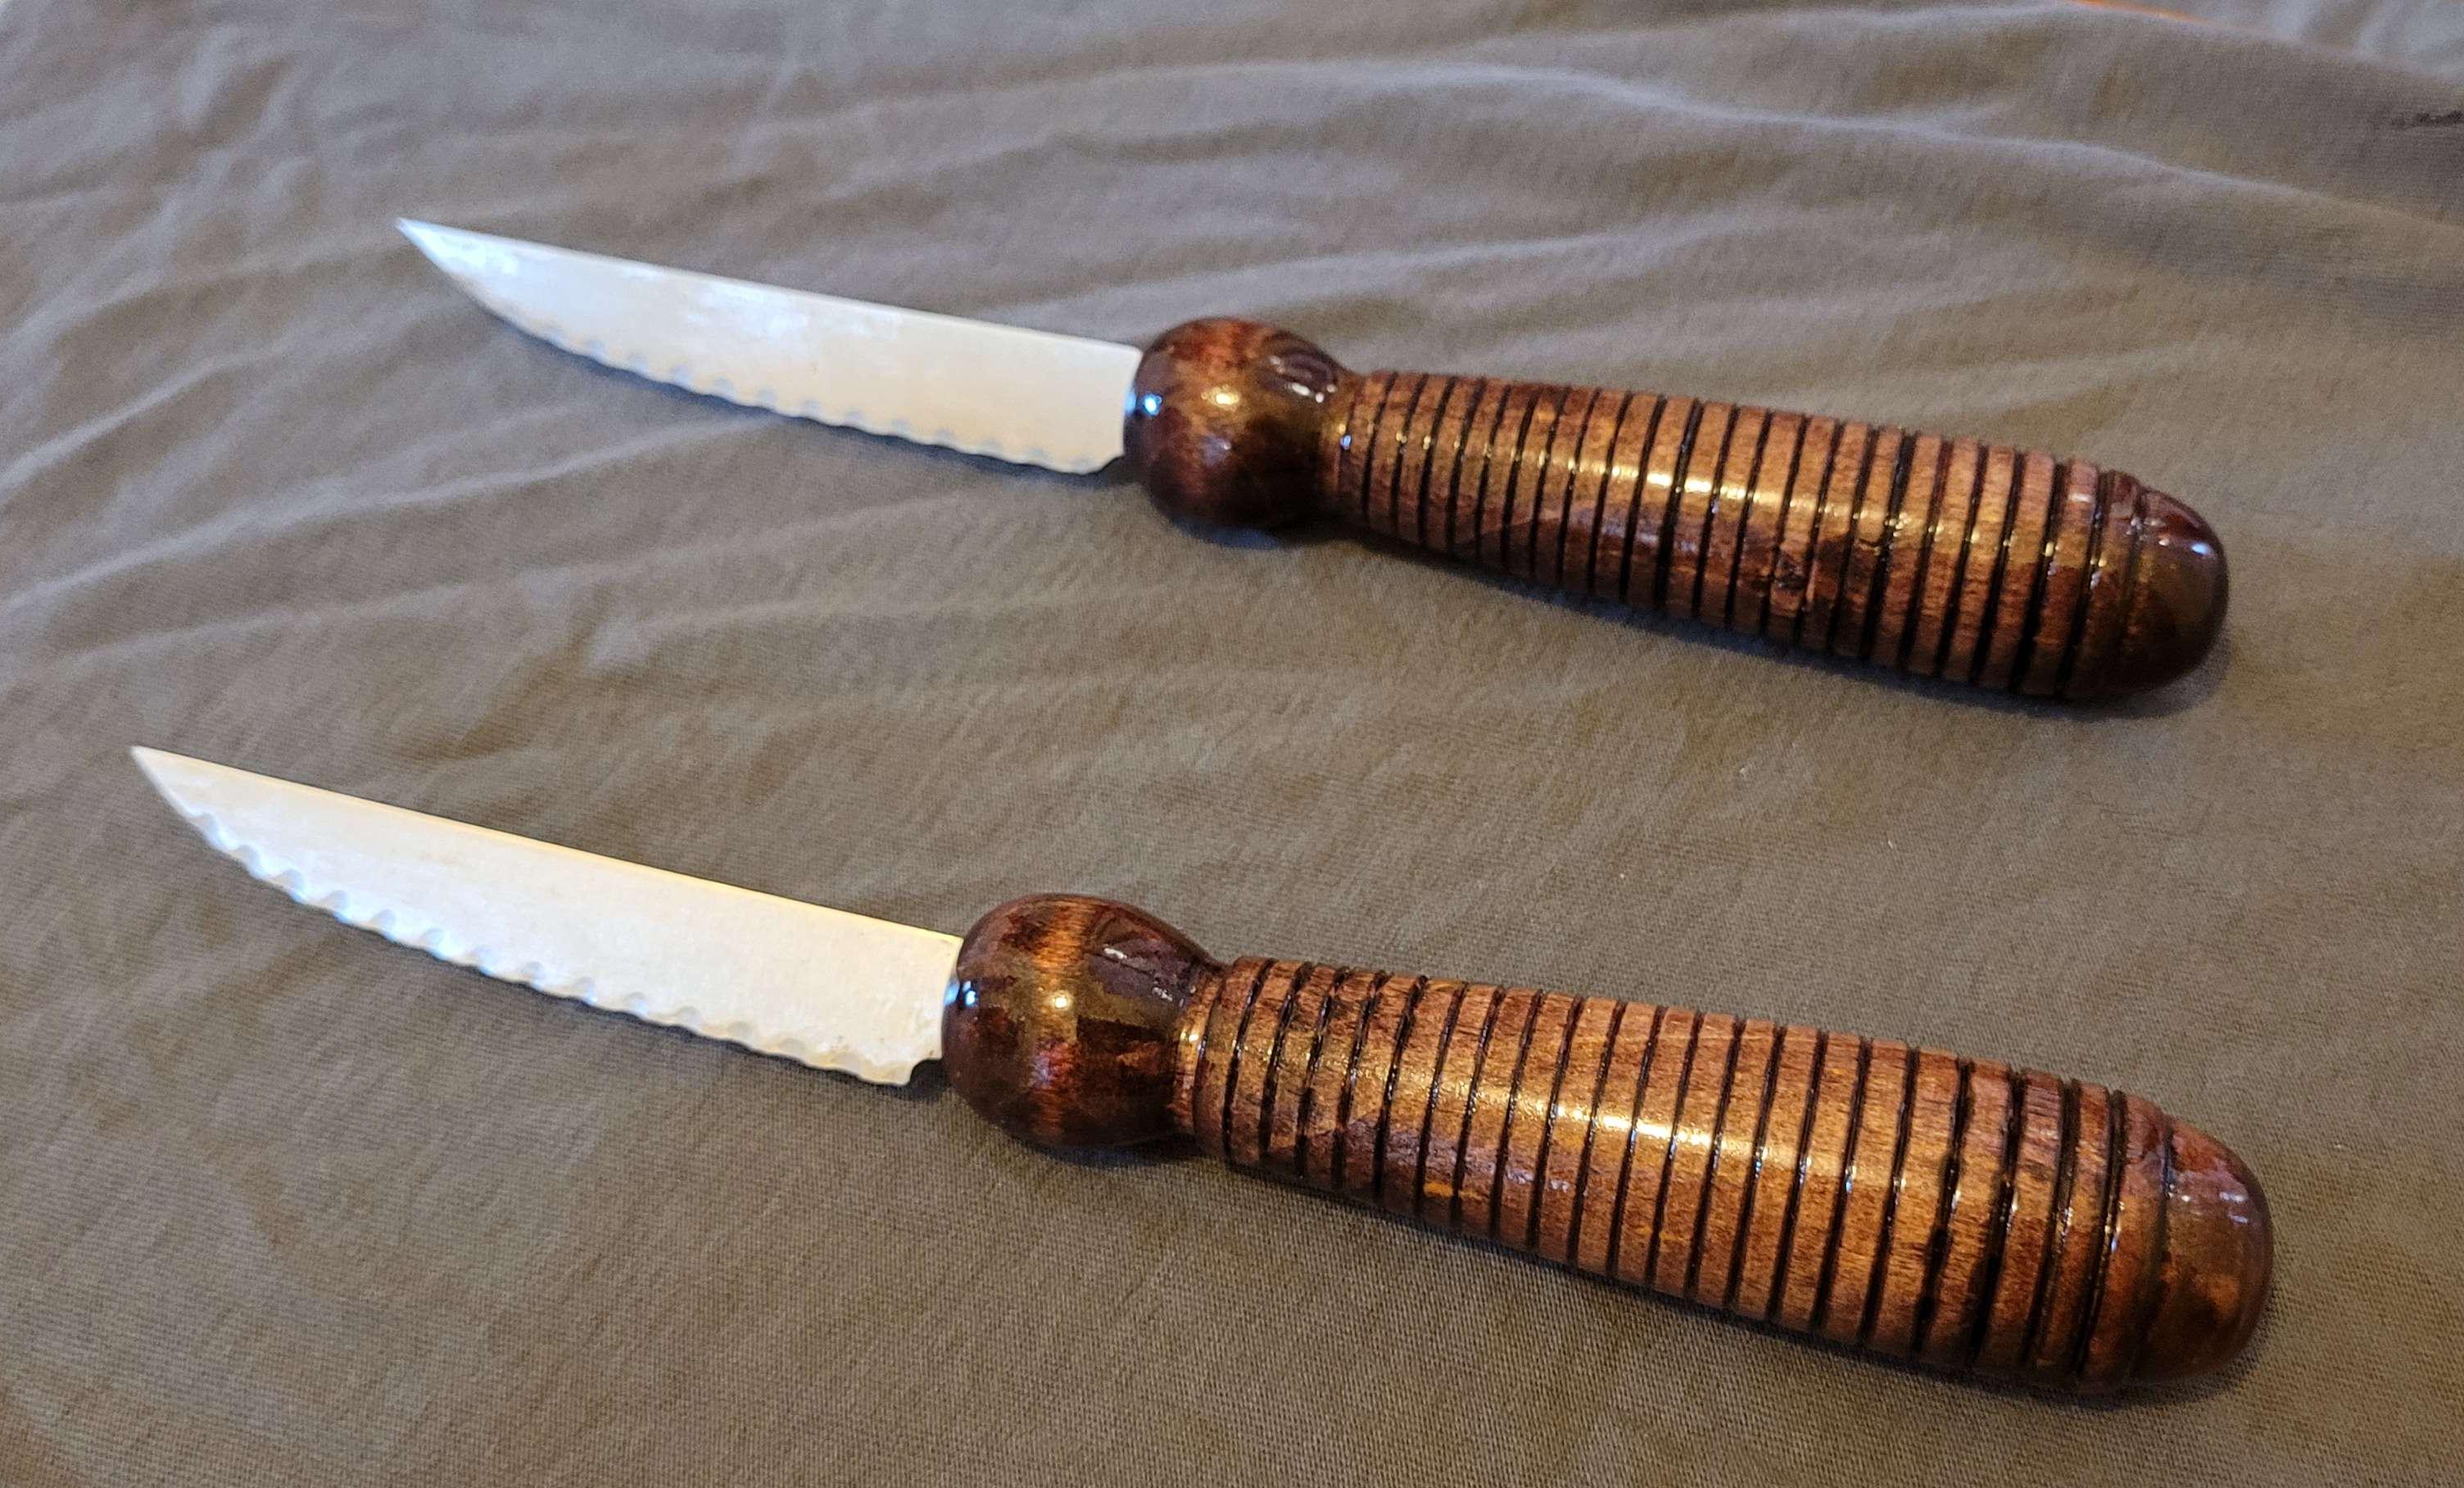 the finished knives